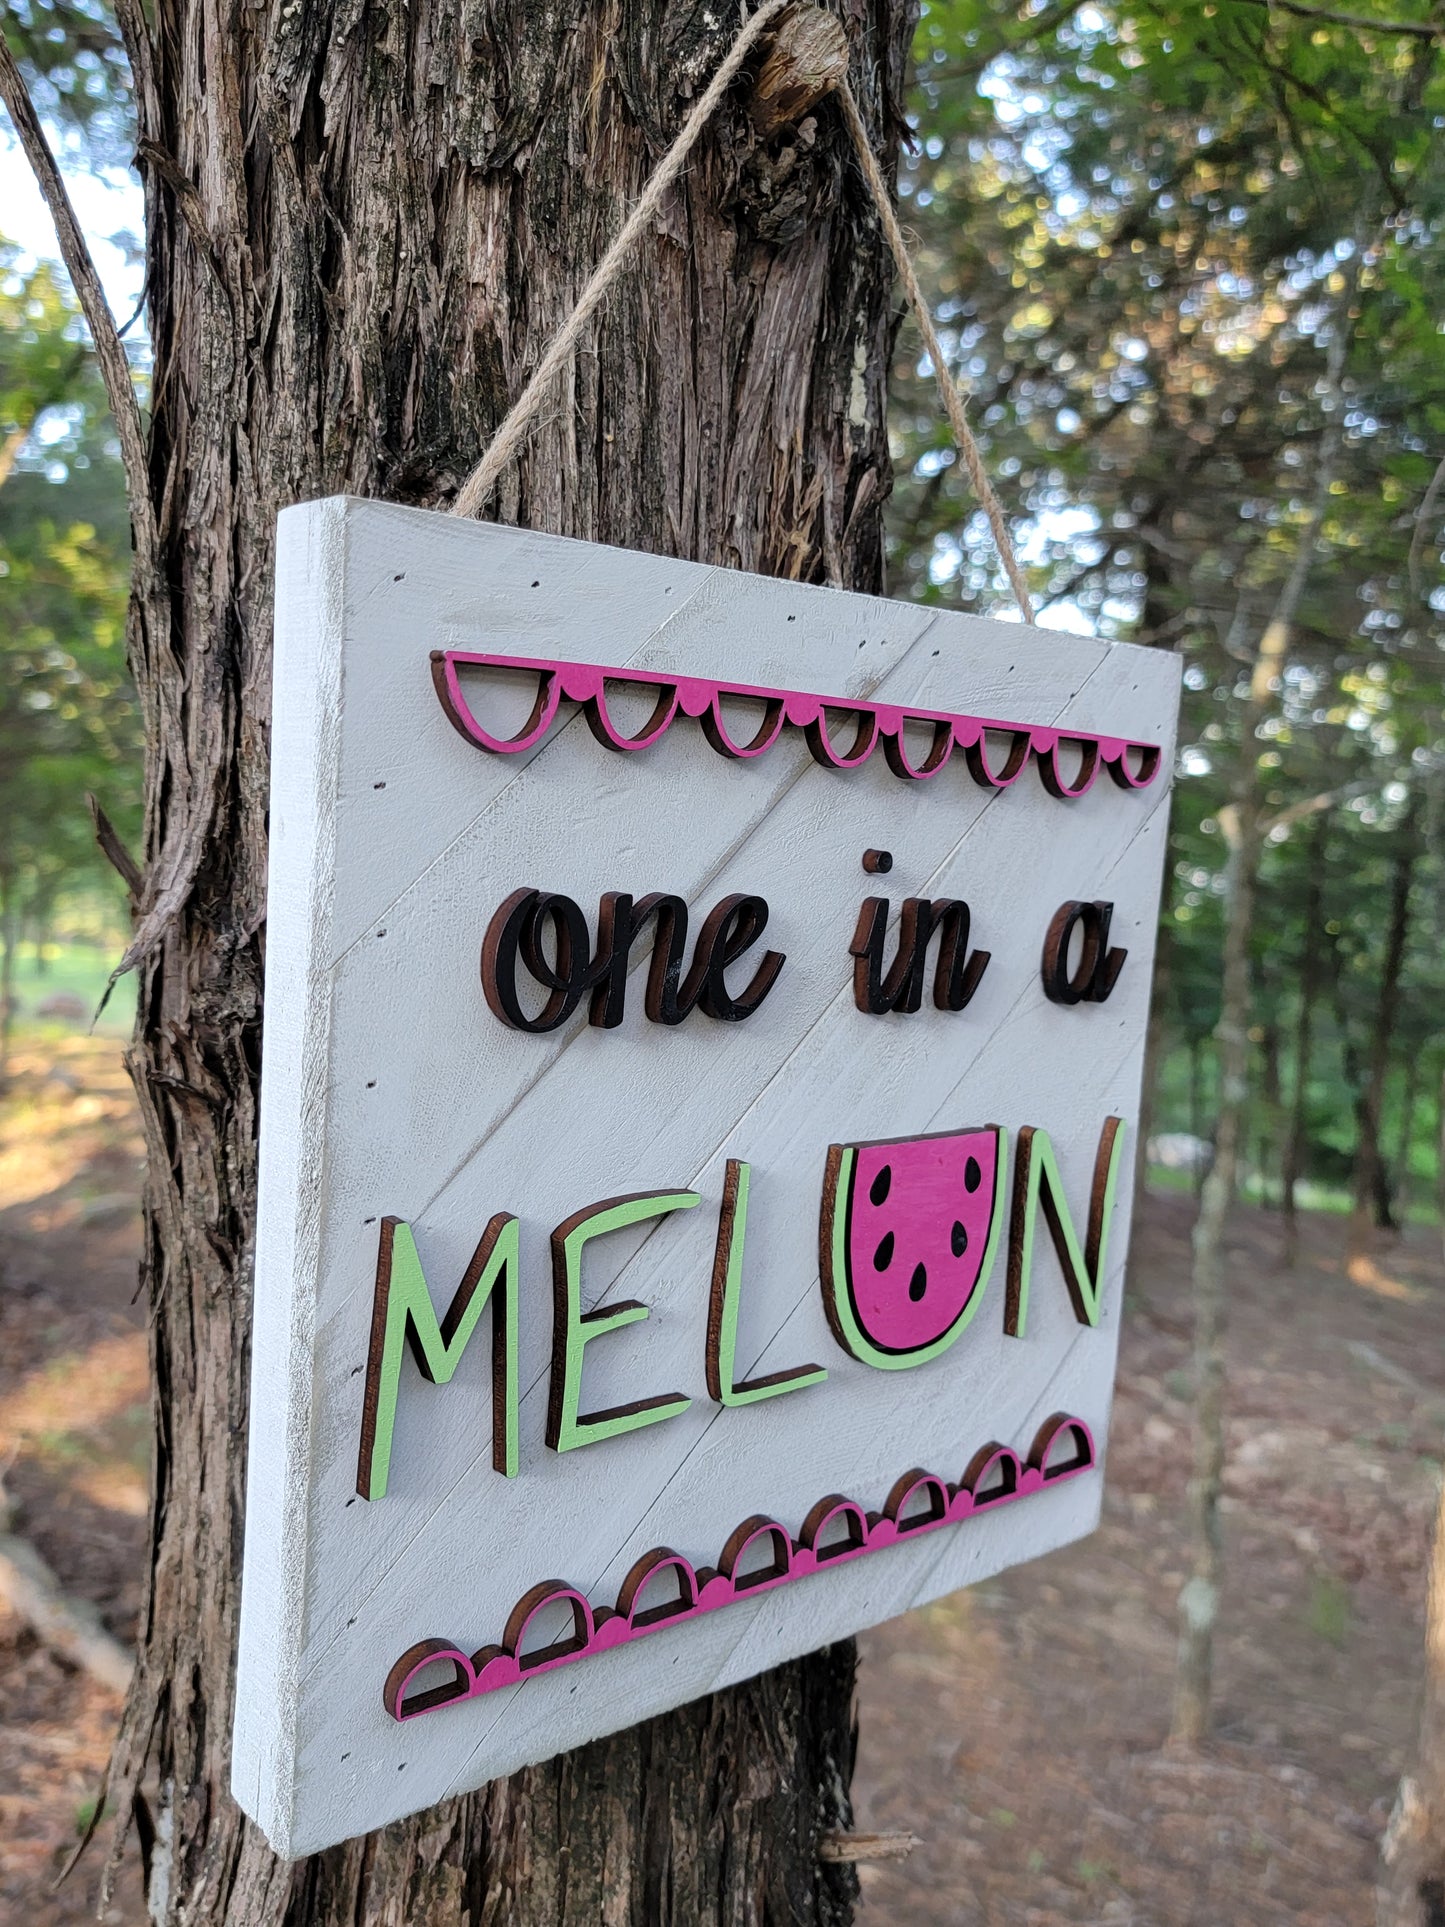 One in a Melon!